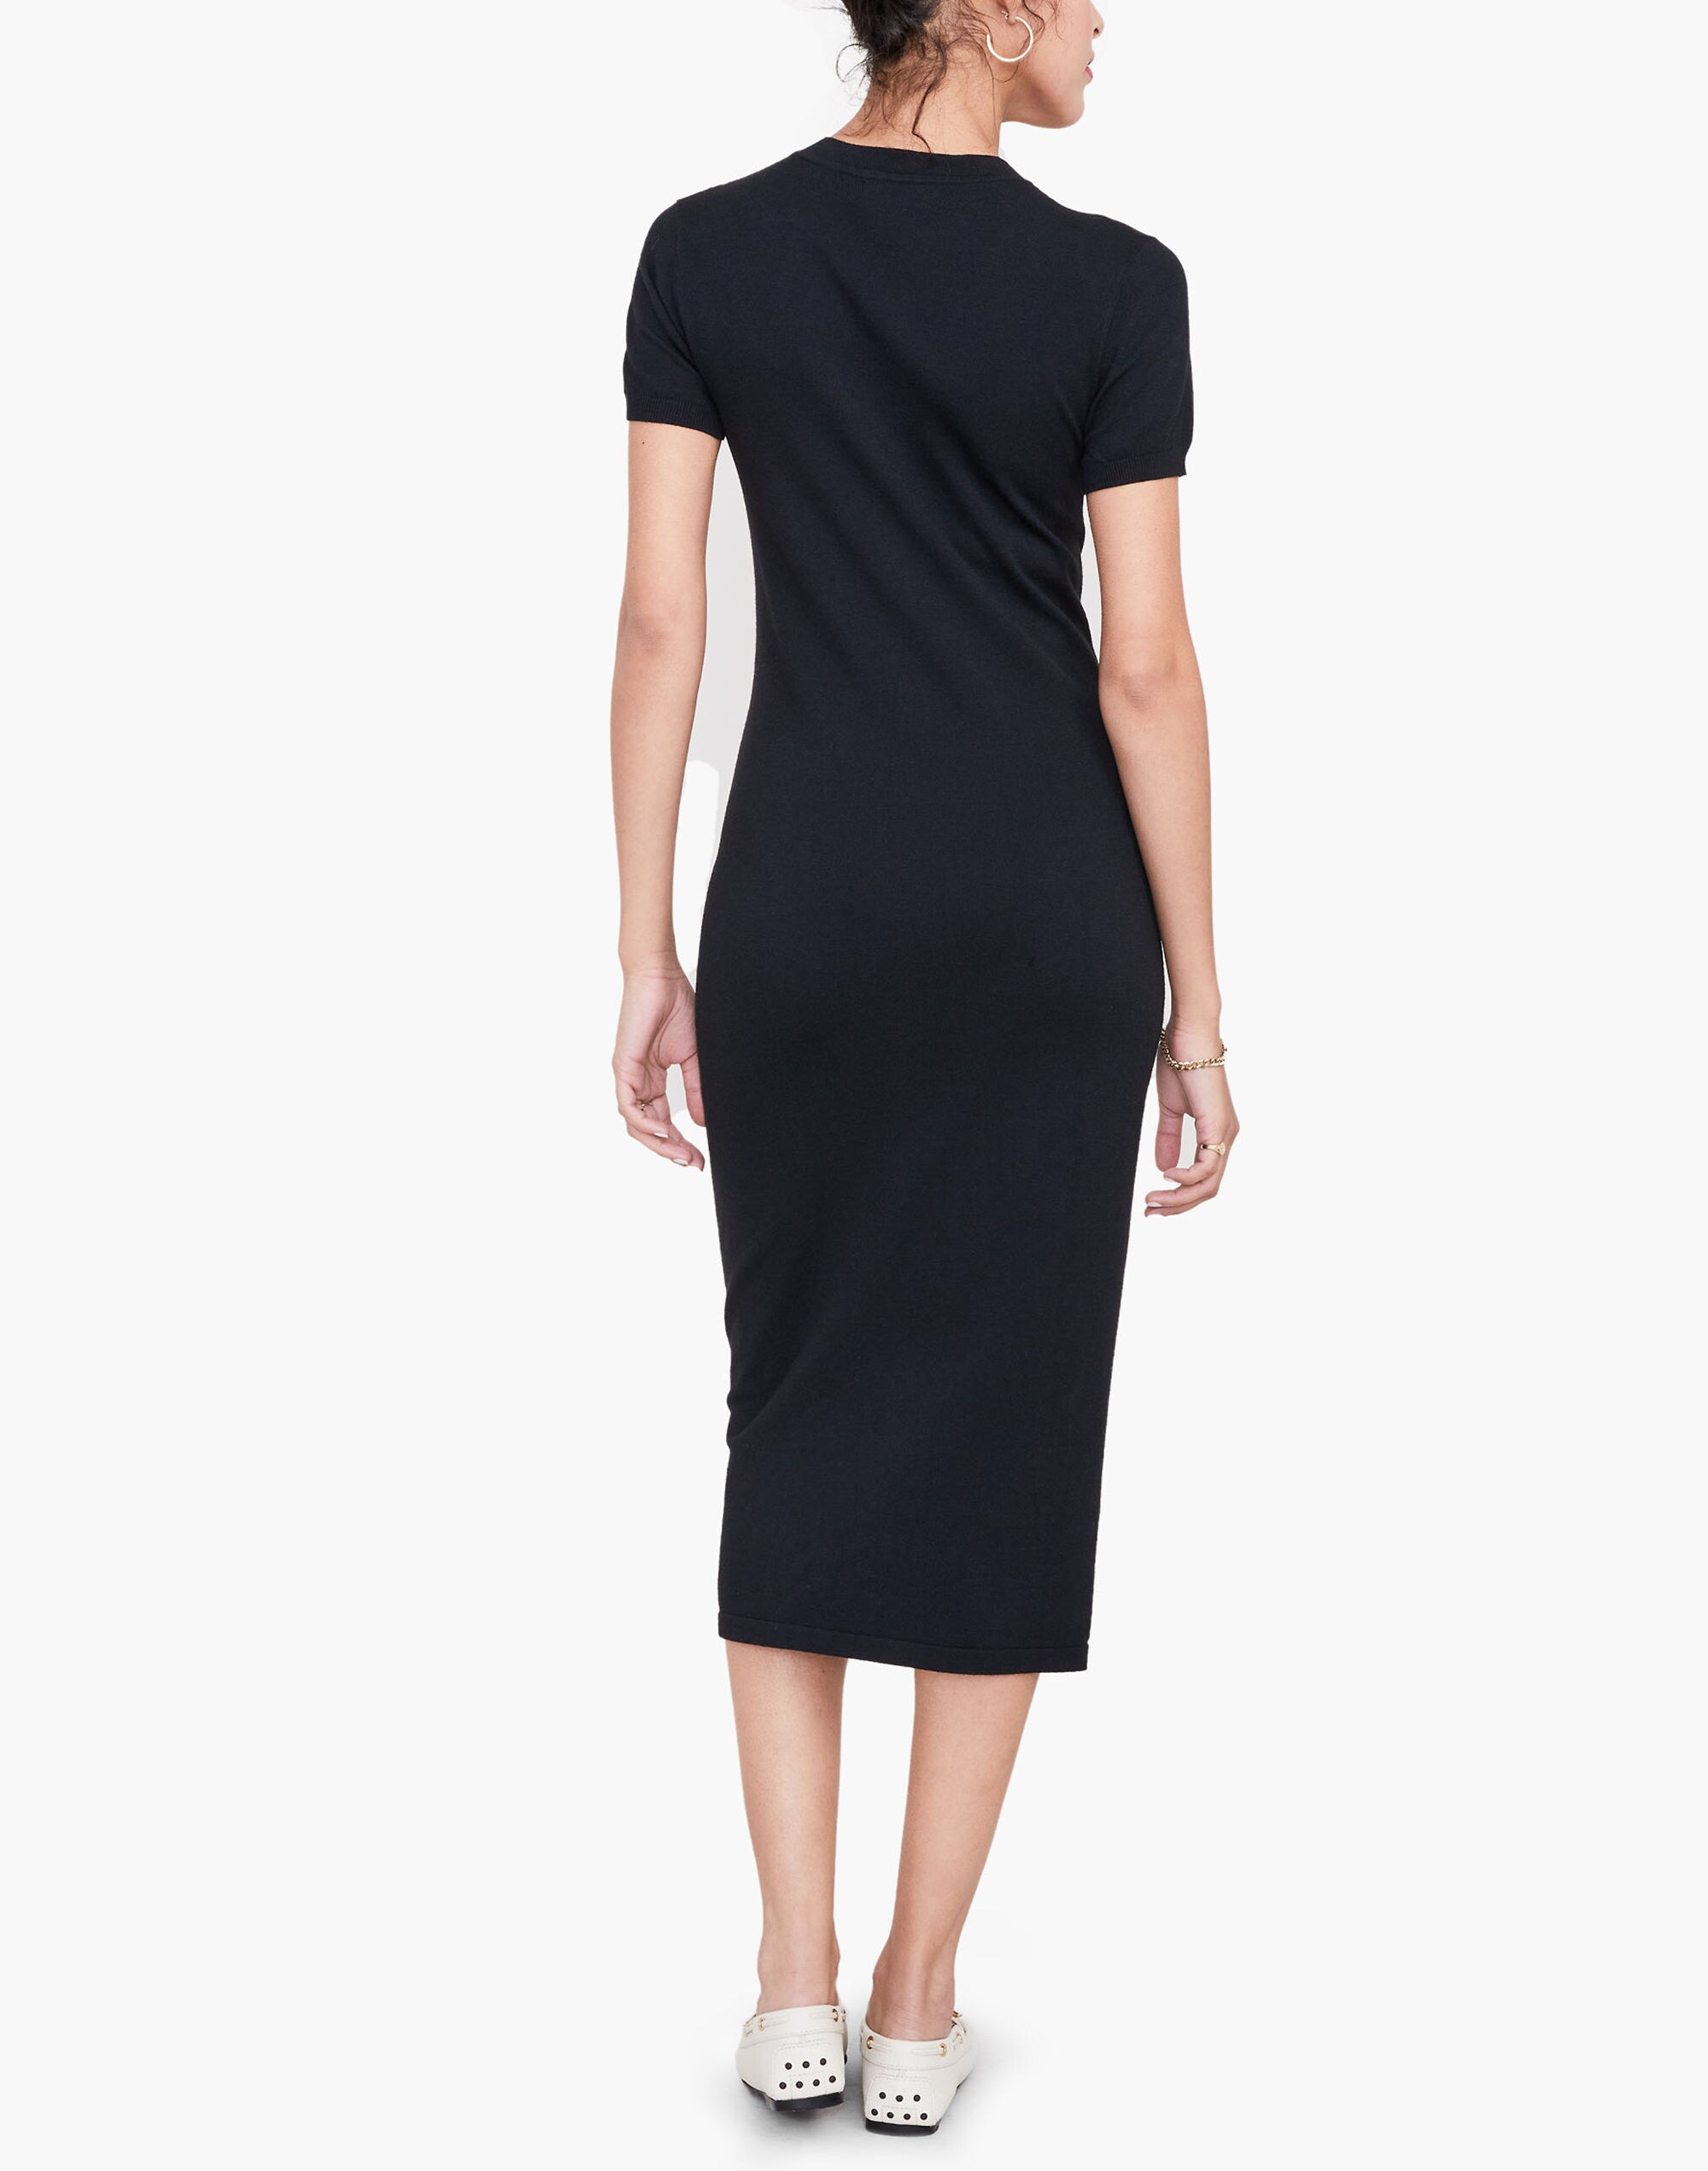 HATCH Collection The Eliza Dress